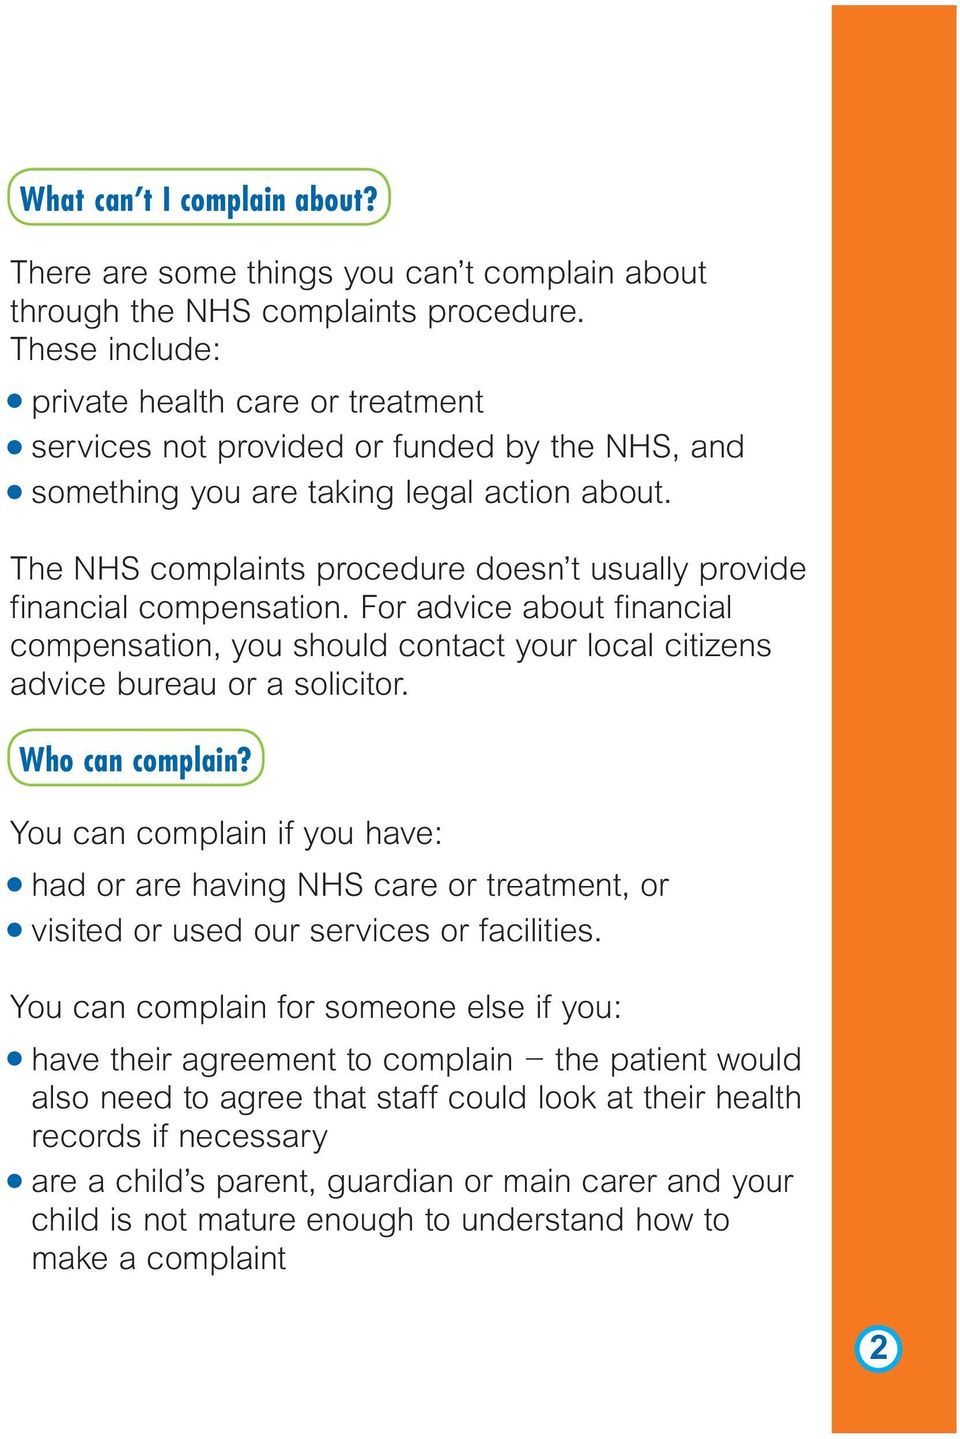 The NHS complaints procedure doesn t usually provide financial compensation. For advice about financial compensation, you should contact your local citizens advice bureau or a solicitor.